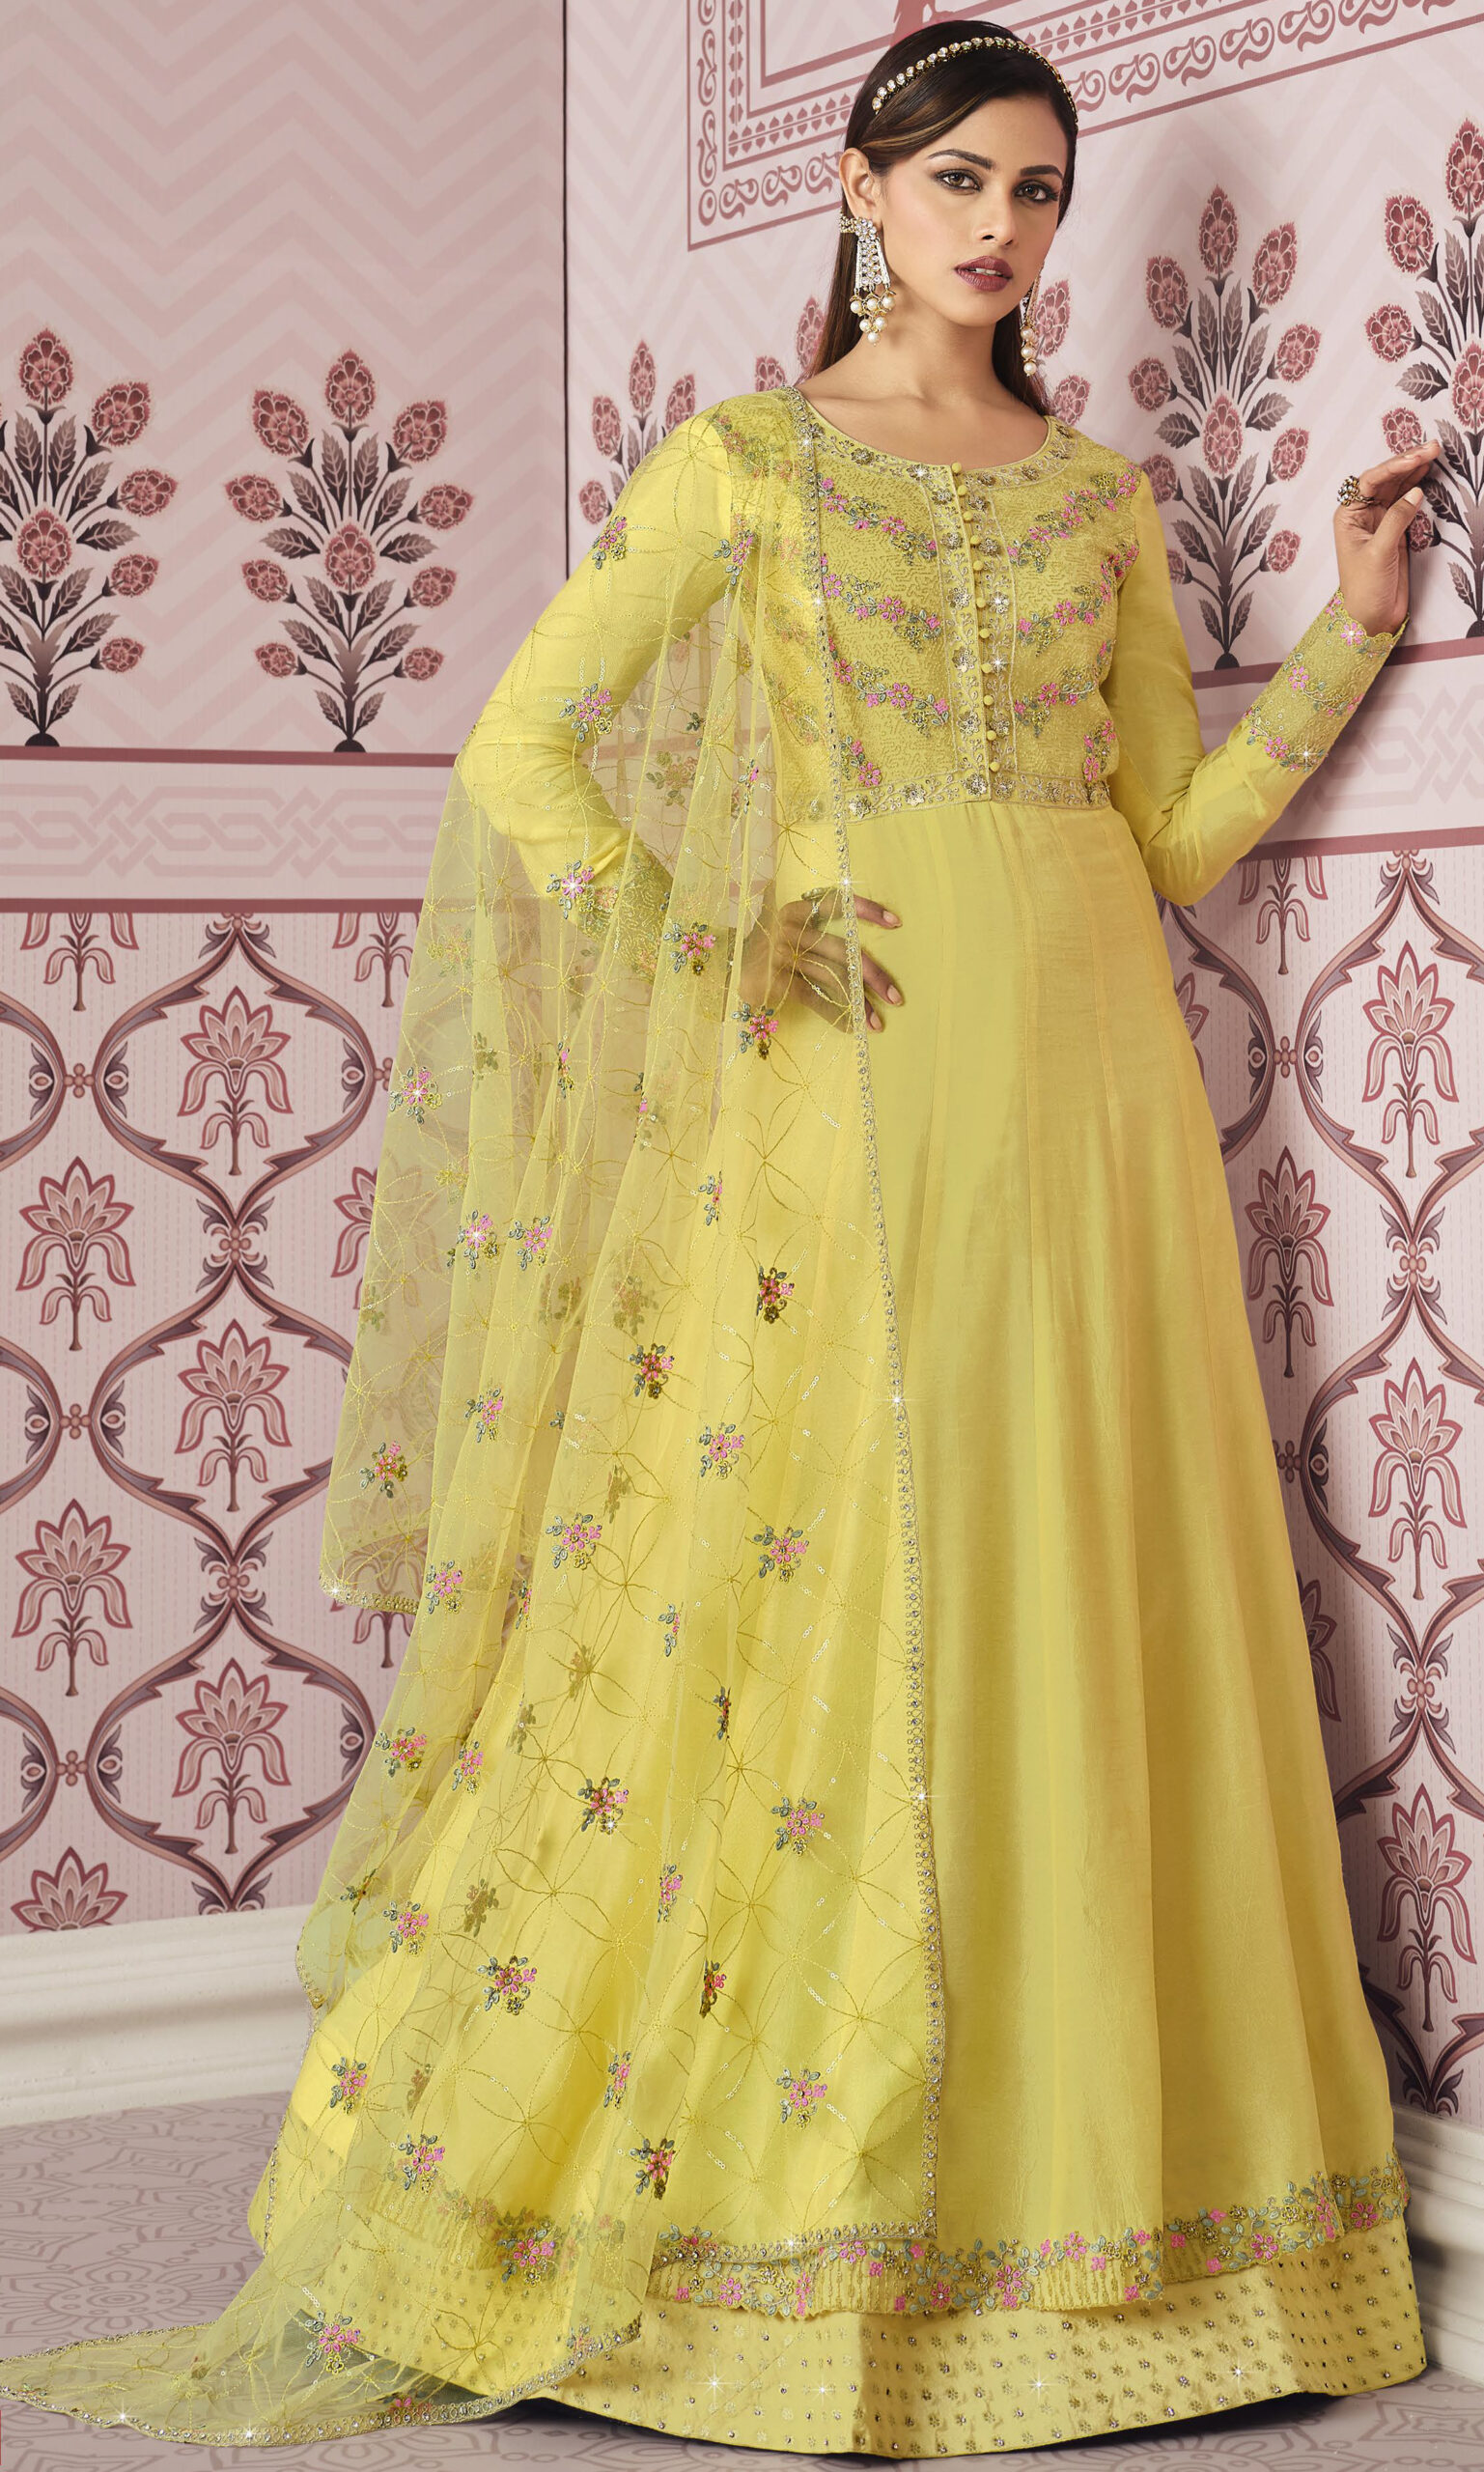 7 outfits from GulAhmed's Eid collection 2022 you should check out for Eid  - Culture - Images